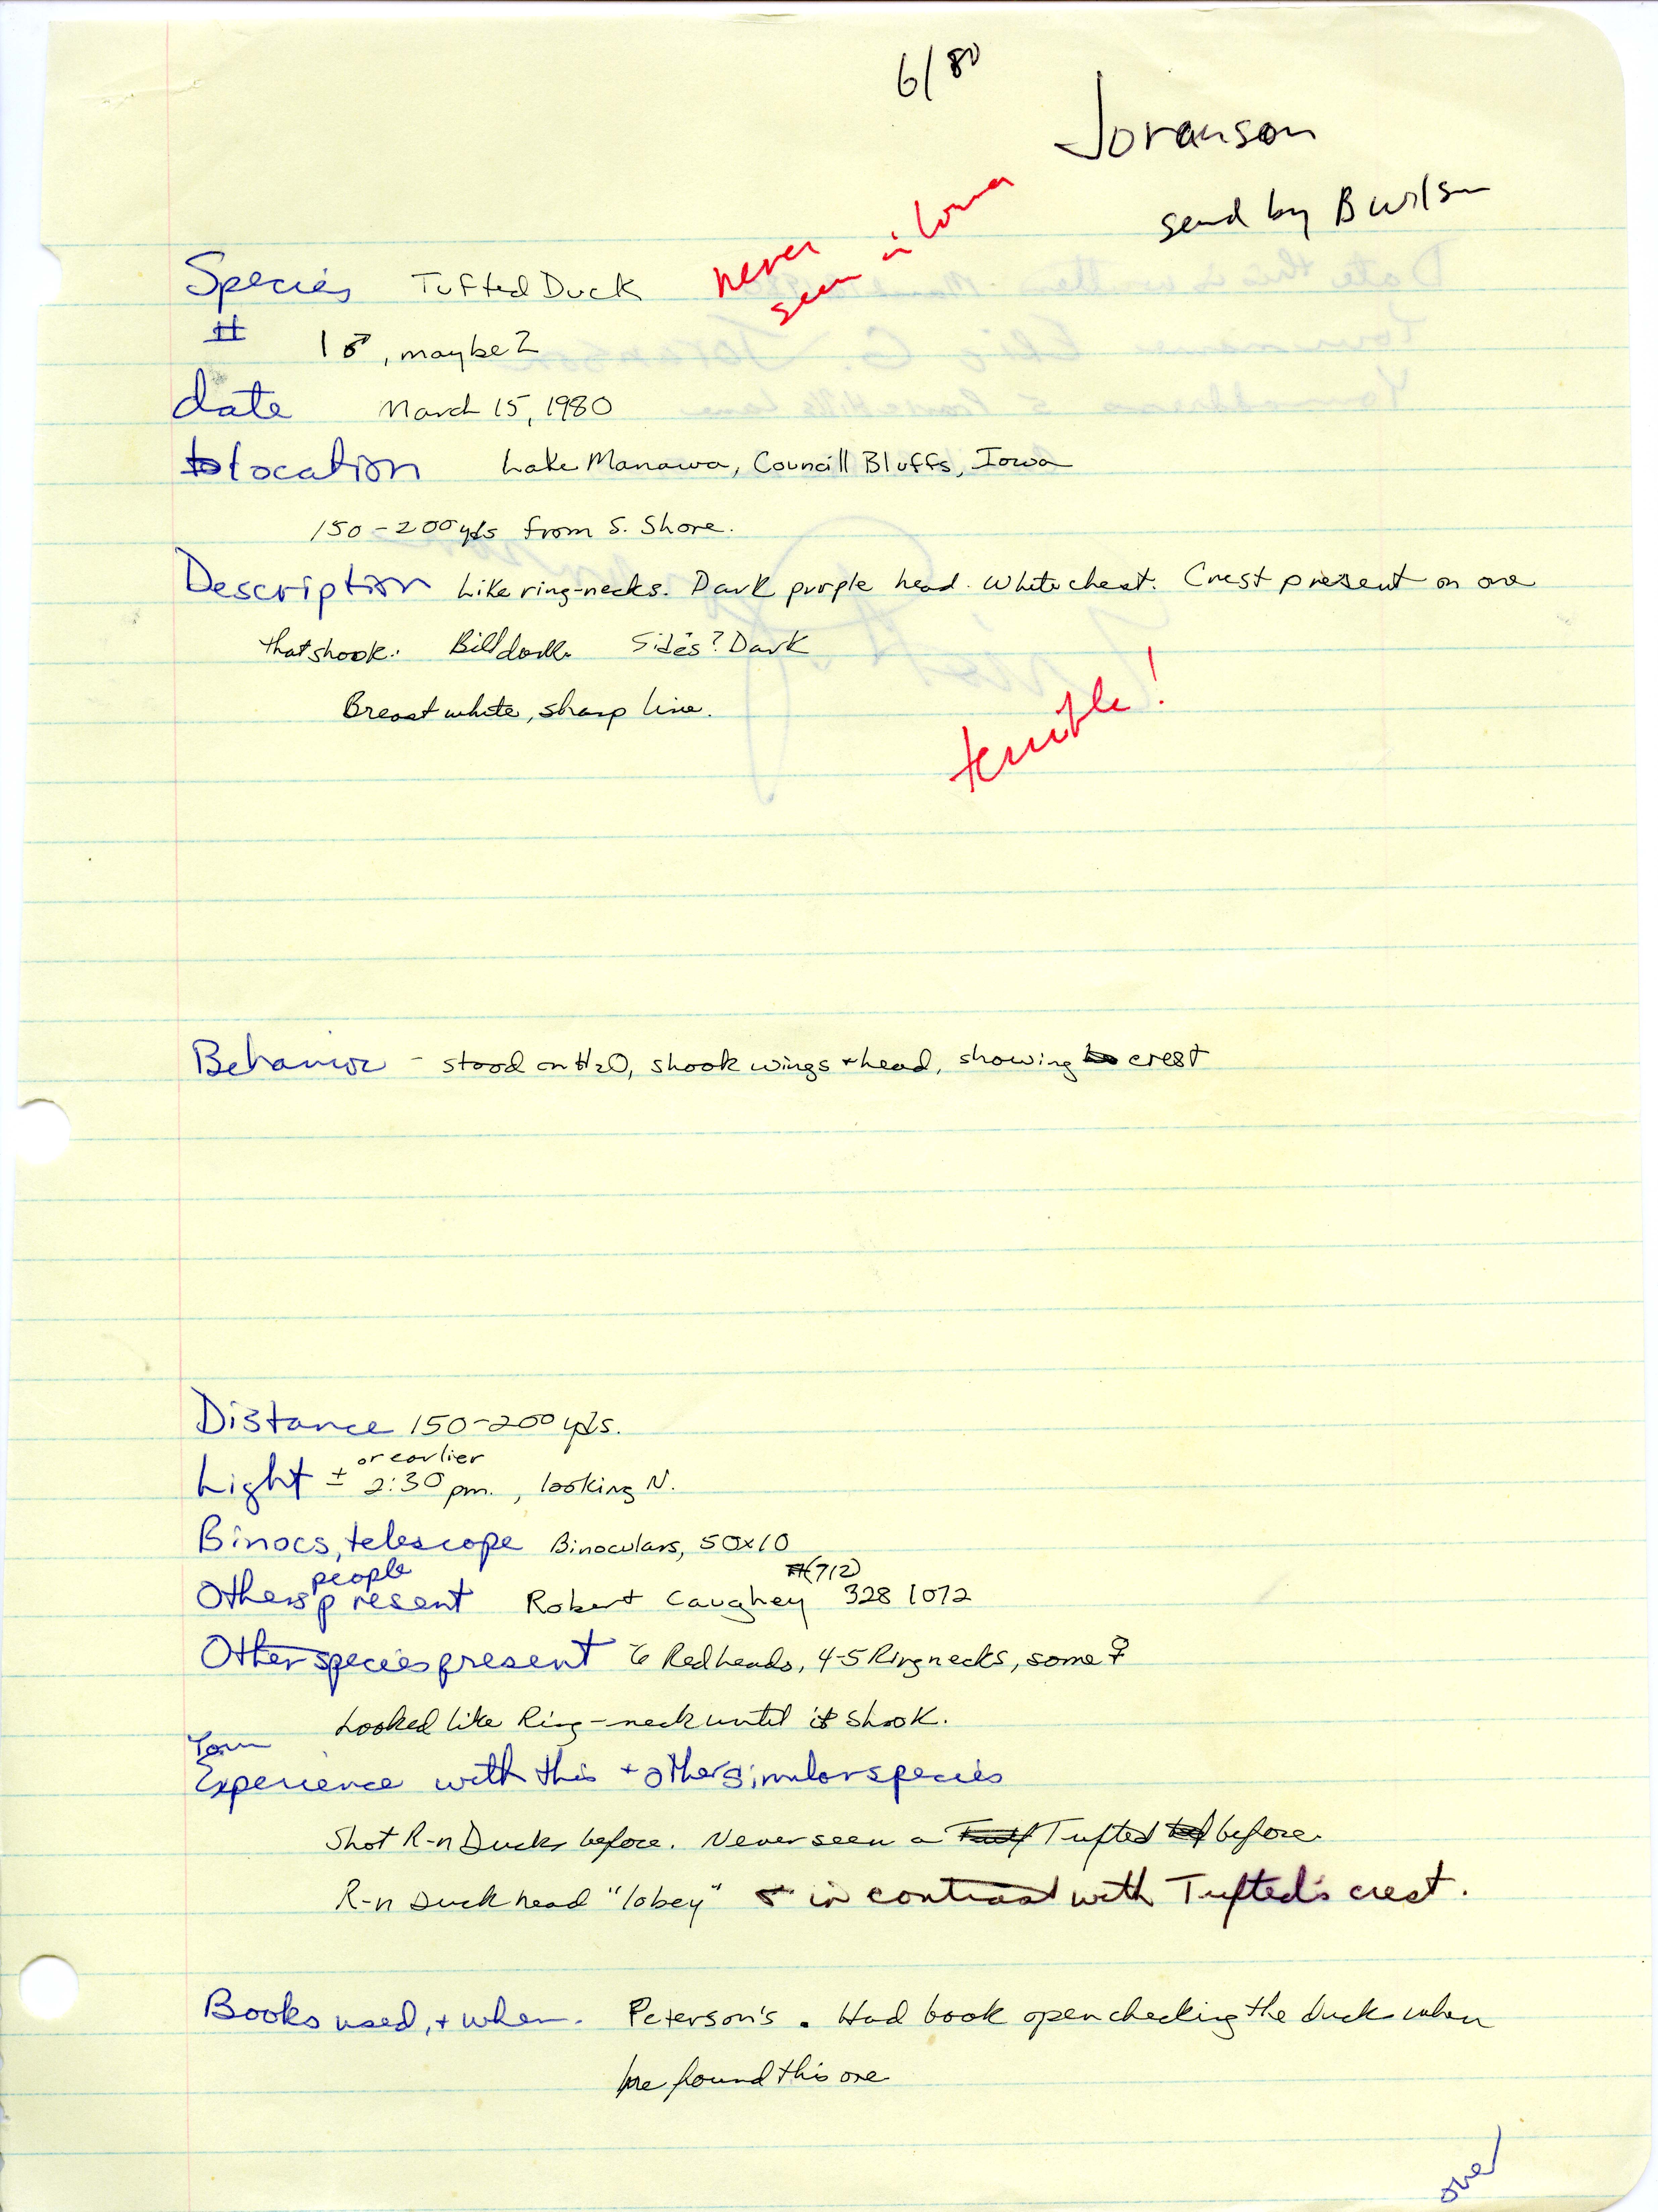 Field notes contributed by Eric G. Joranson, March 15, 1980